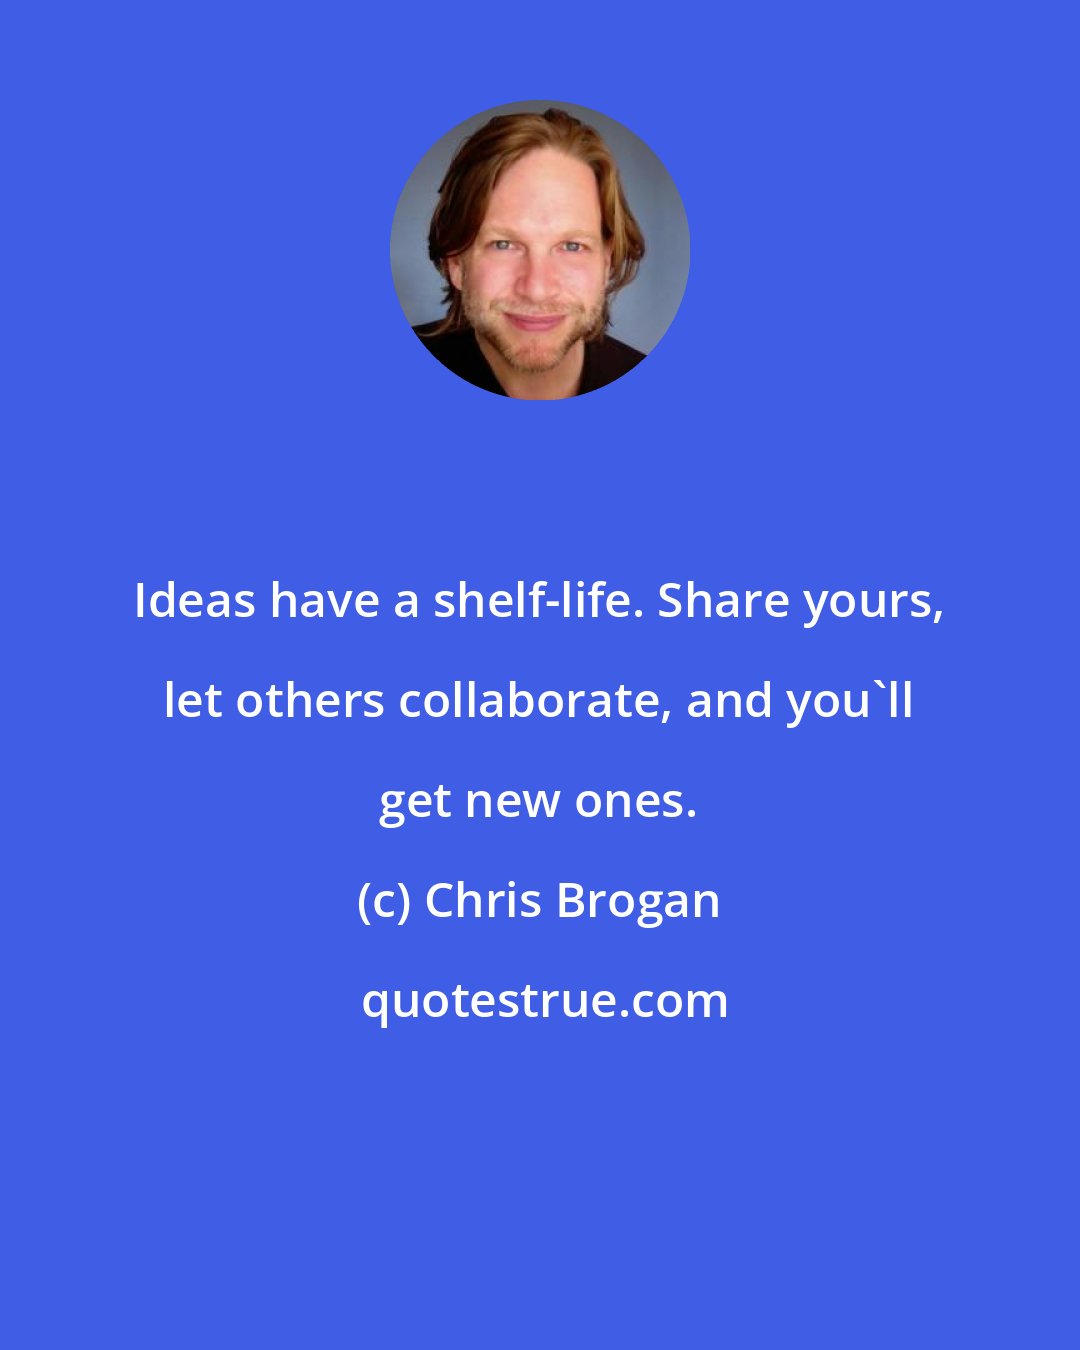 Chris Brogan: Ideas have a shelf-life. Share yours, let others collaborate, and you'll get new ones.